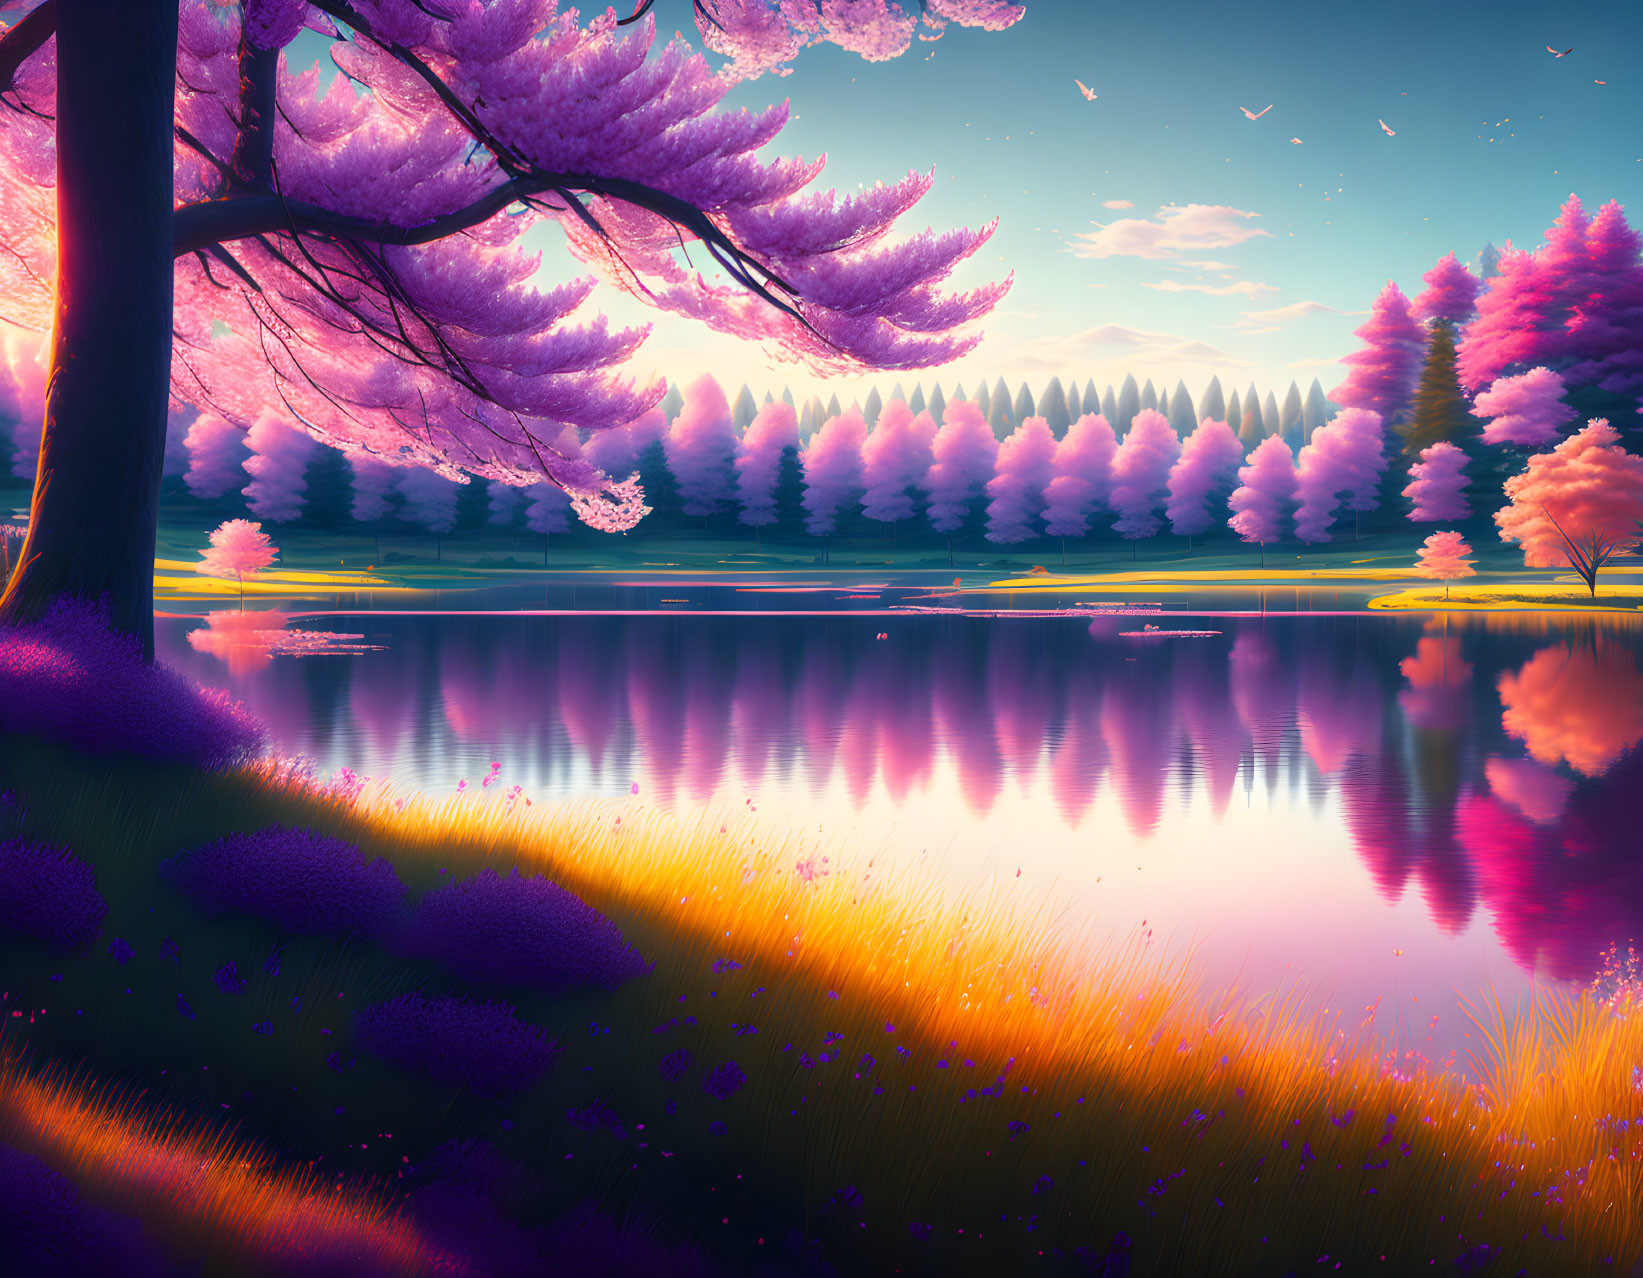 Scenic lakeside view with pink blossoming trees, calm water, colorful sunset sky, and distant